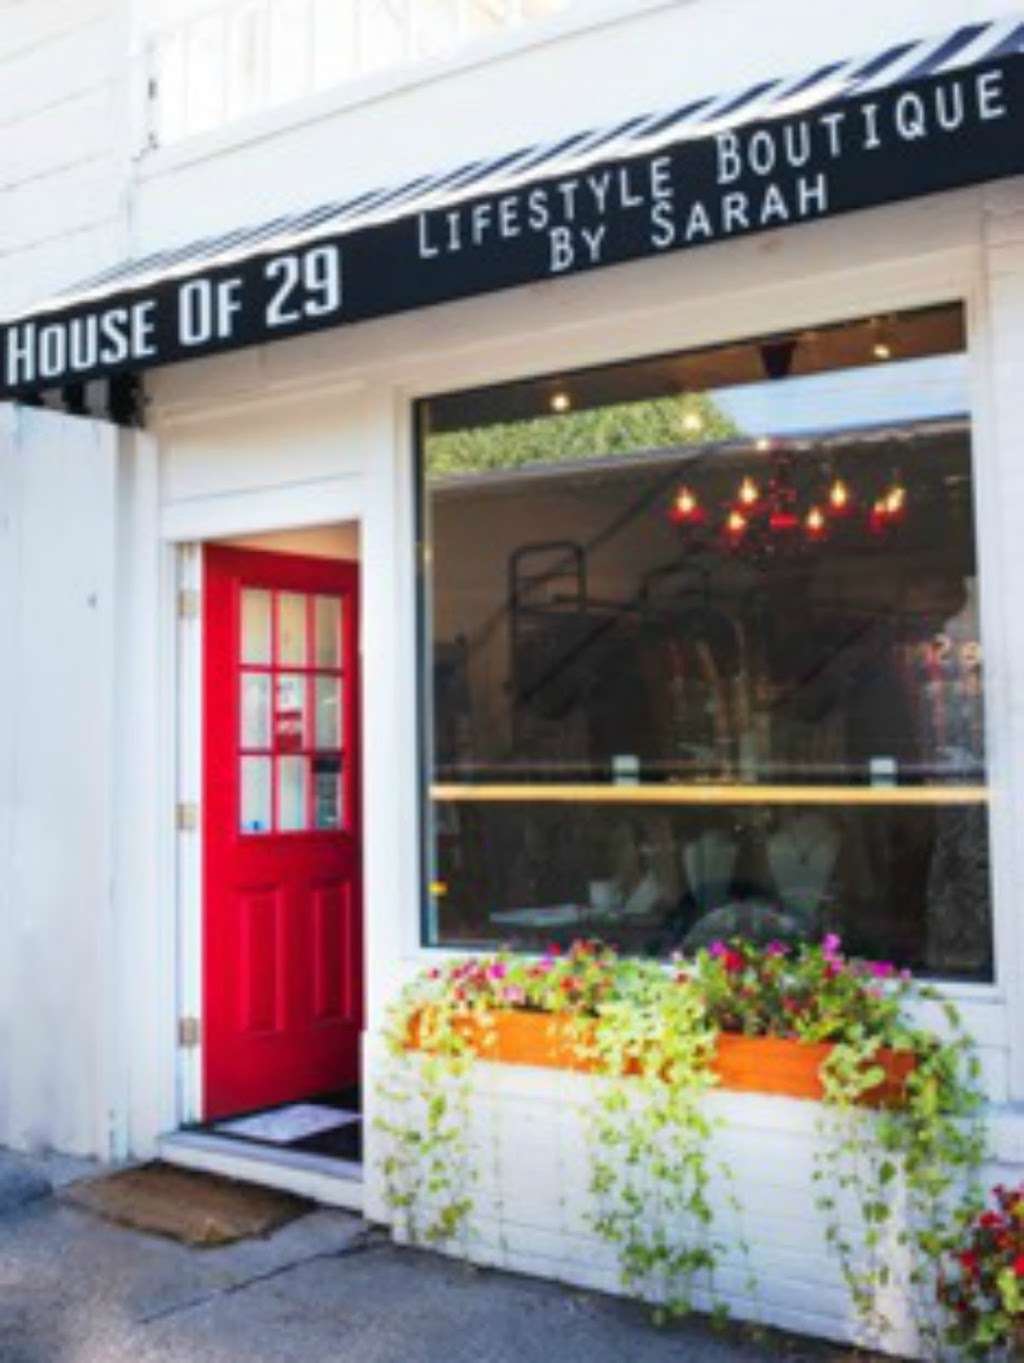 House Of 29 Lifestyle Boutique By Sarah | 39 S Greeley Ave, Chappaqua, NY 10514, USA | Phone: (914) 861-2928